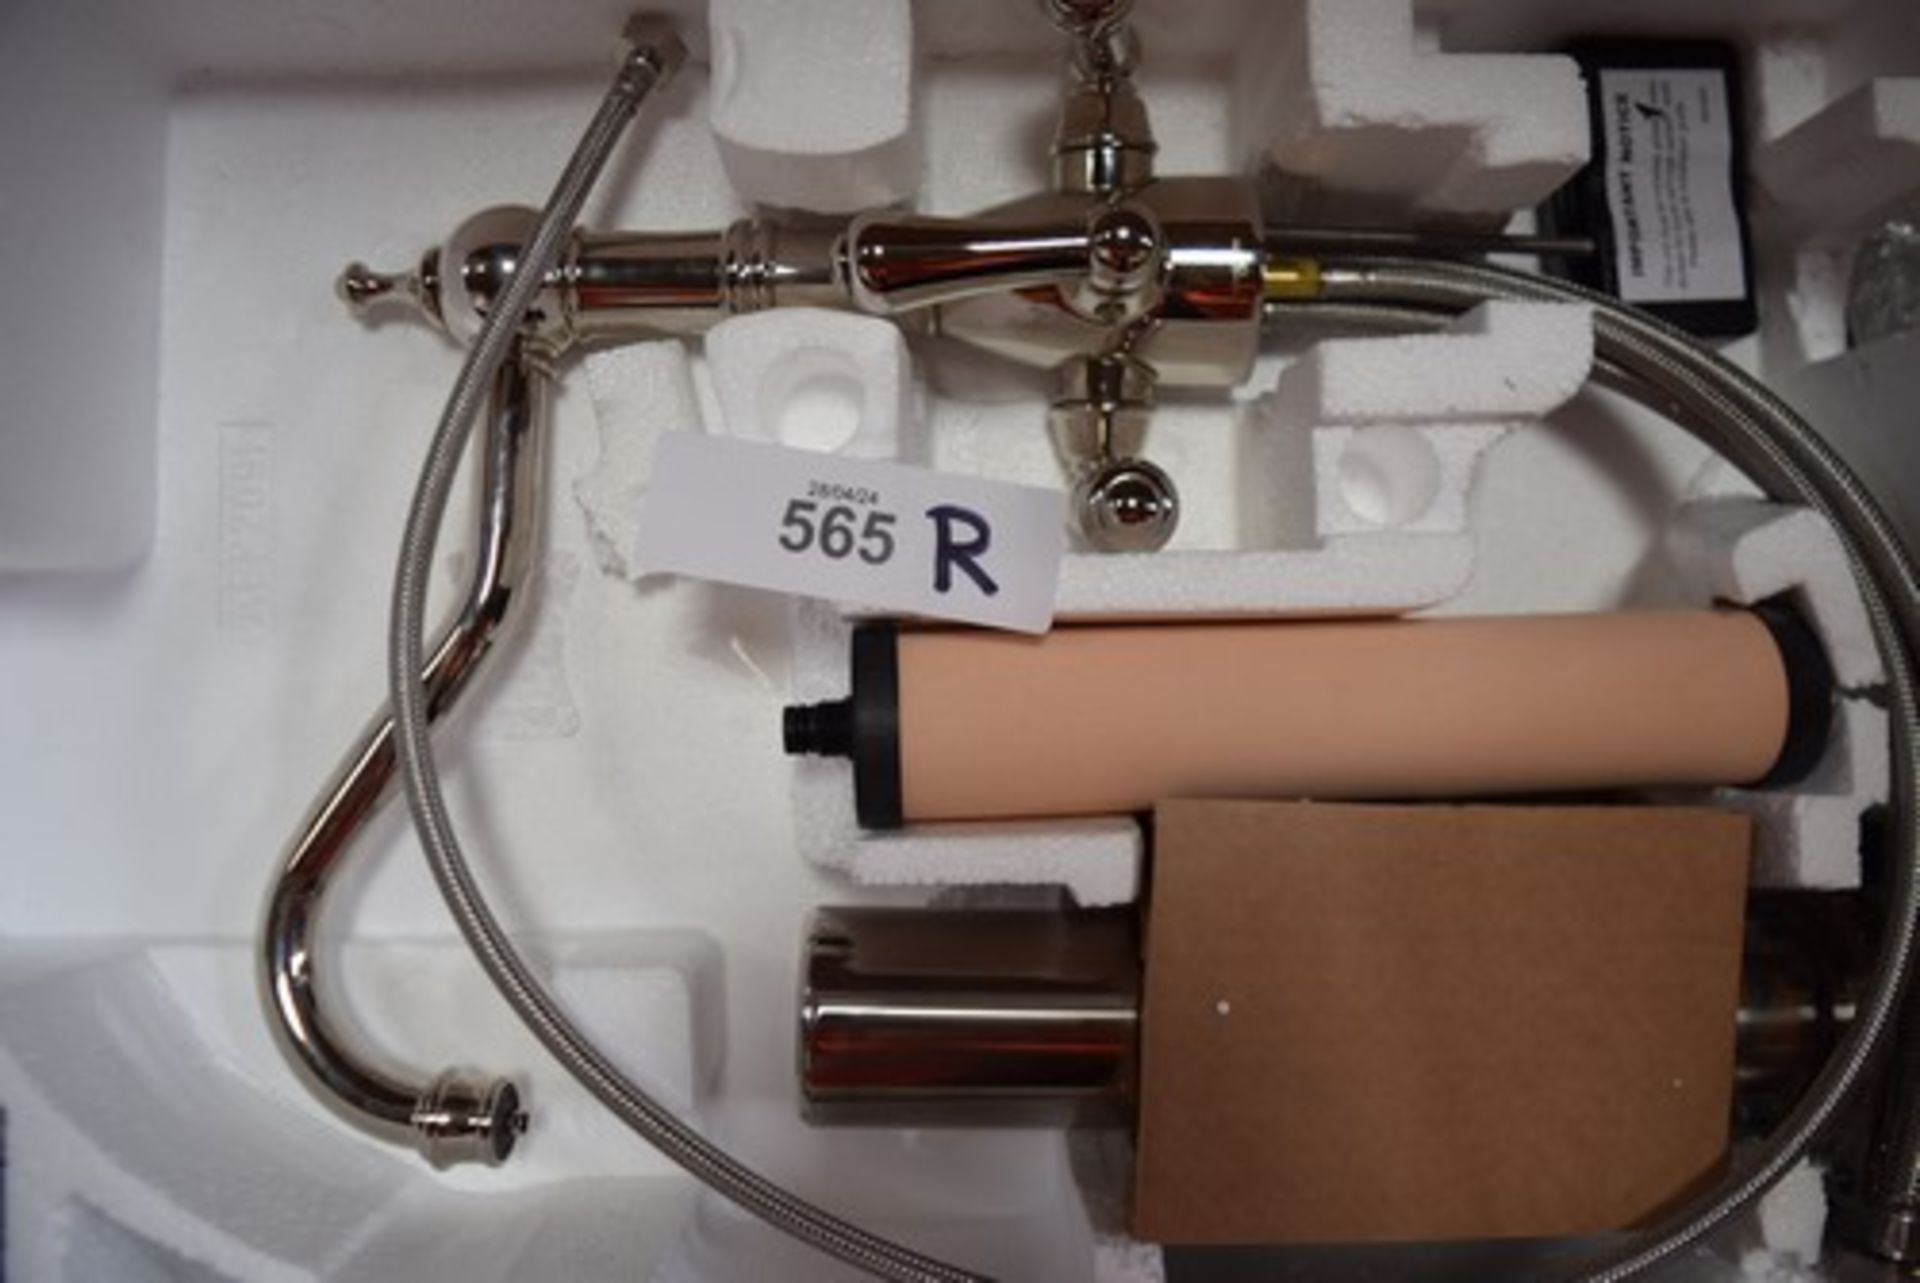 1 x Perrin and Rowe Picardie triple lever nickel sink filter tap and rinse, item No: 1575NI - new in - Image 2 of 3